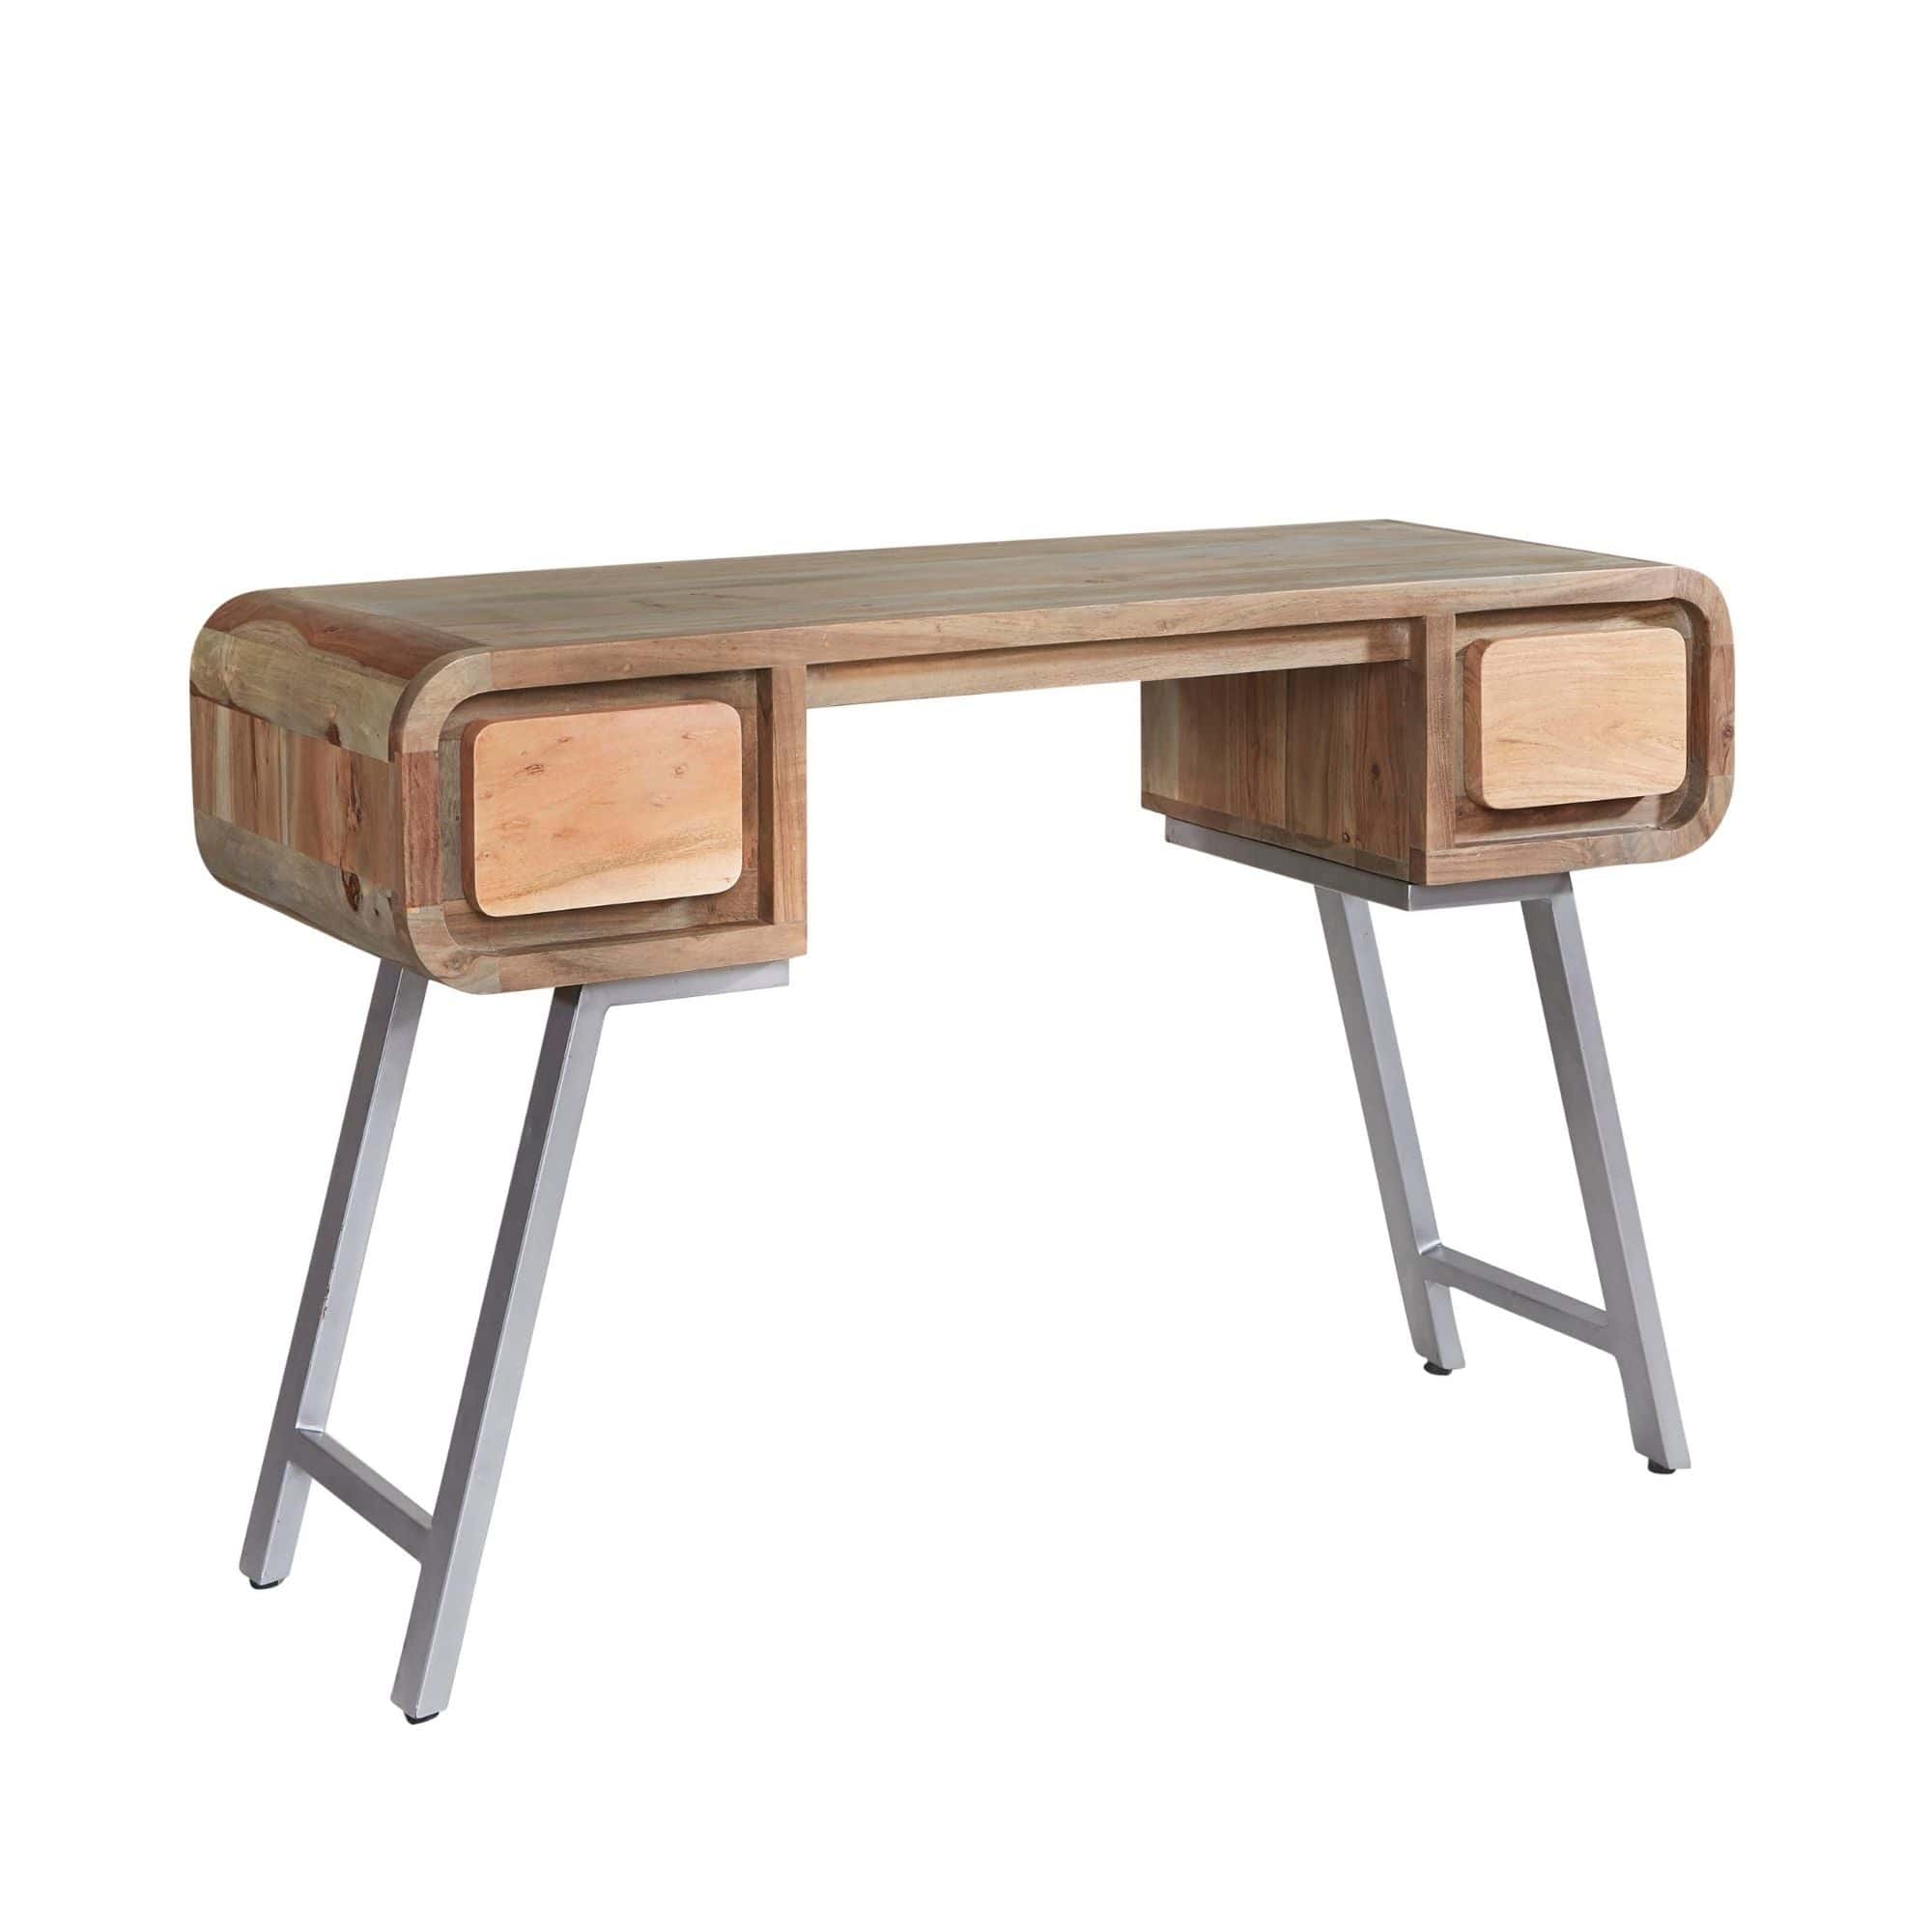 Kasia handmade home study desk with 2 drawers in solid acacia wood and reclaimed metal base | MalletandPlane.com